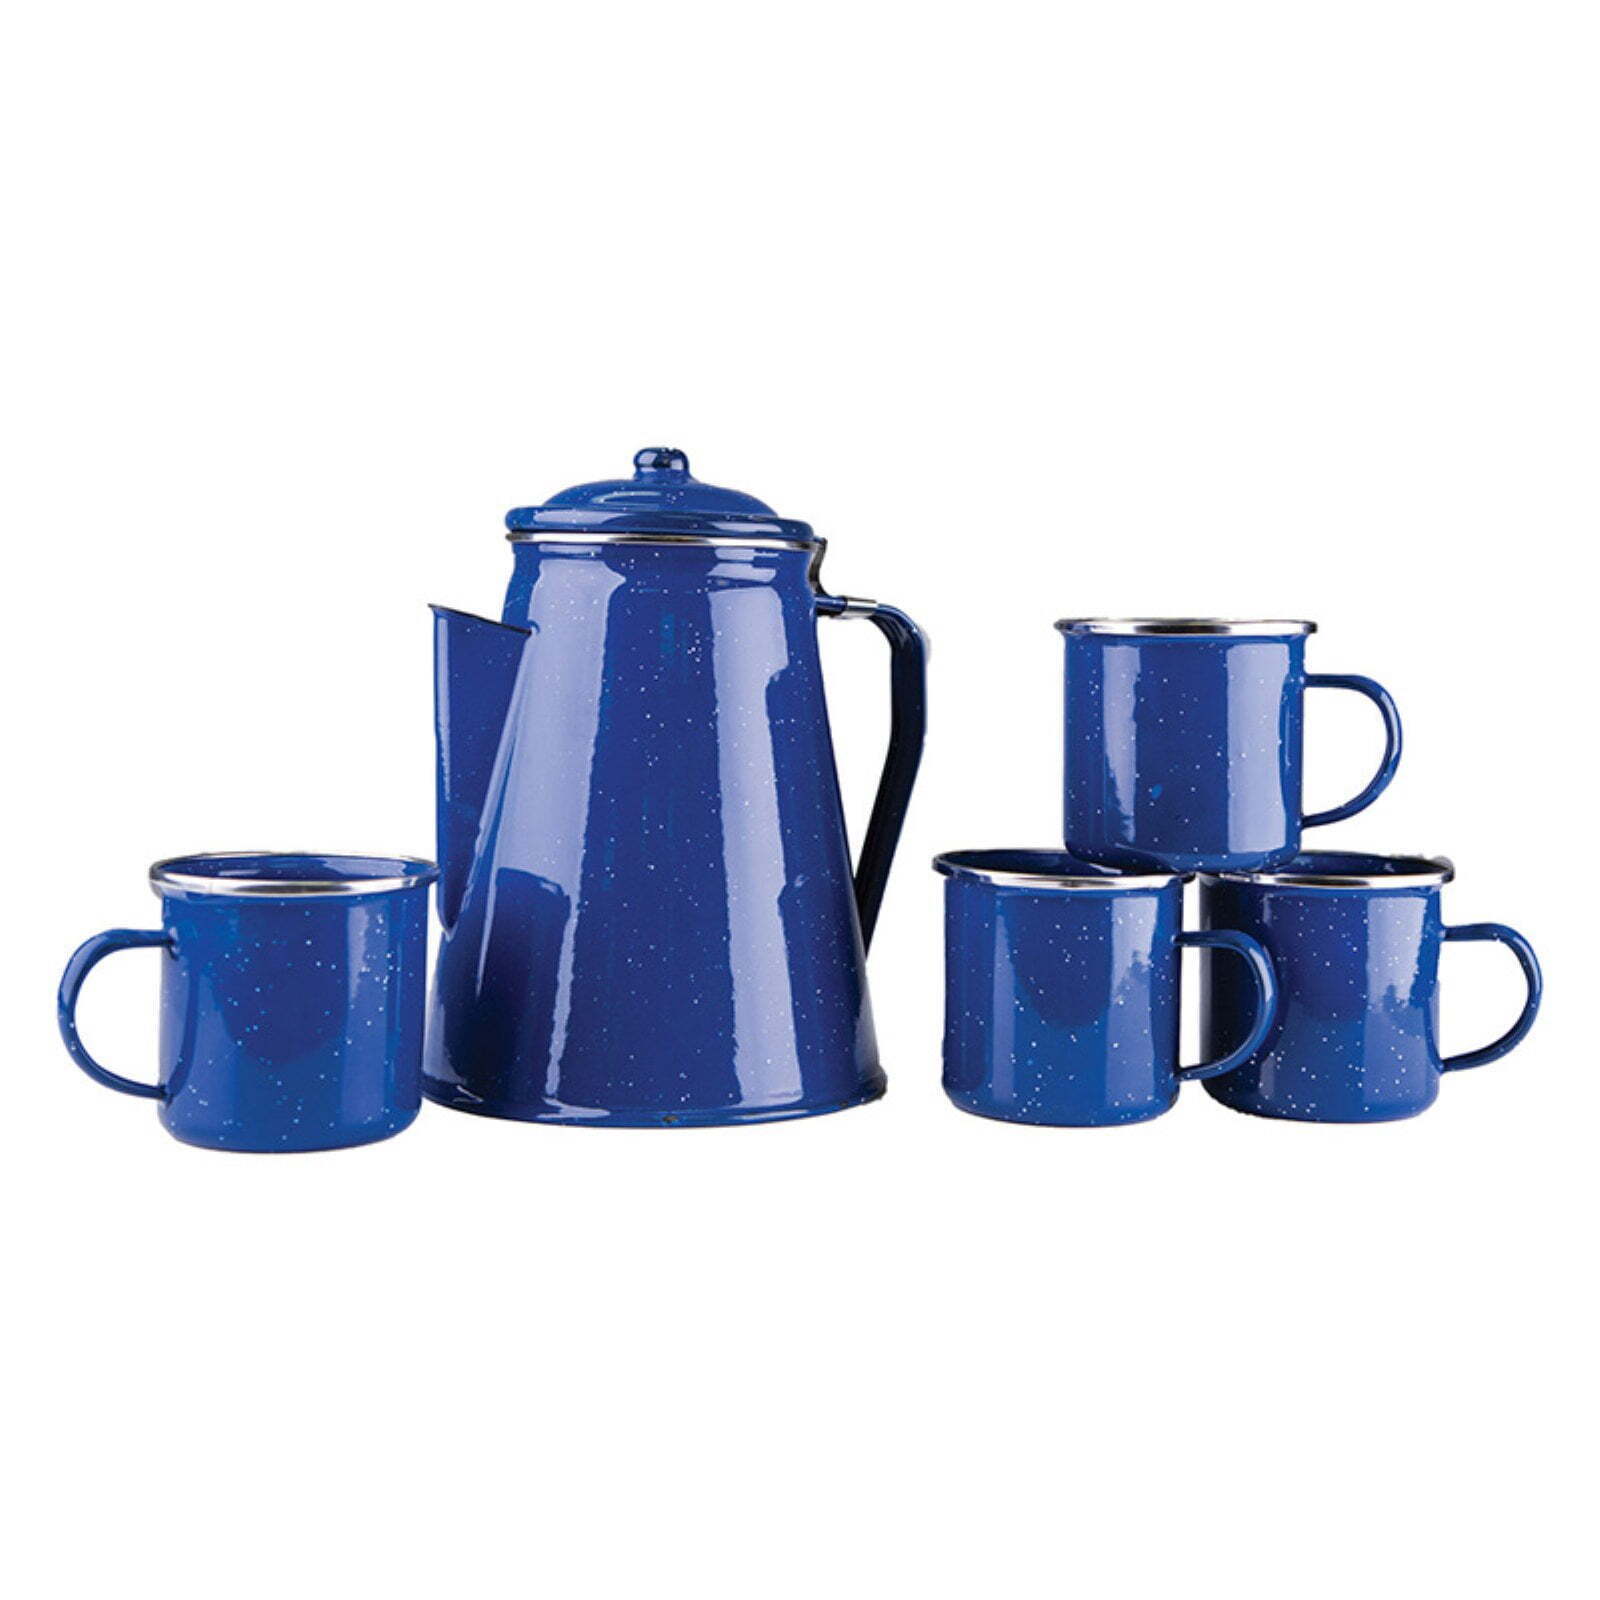 Enamel 8 Cup Coffee Pot with Percolator and (4) 12 Ounce Mugs for Camping, Blue